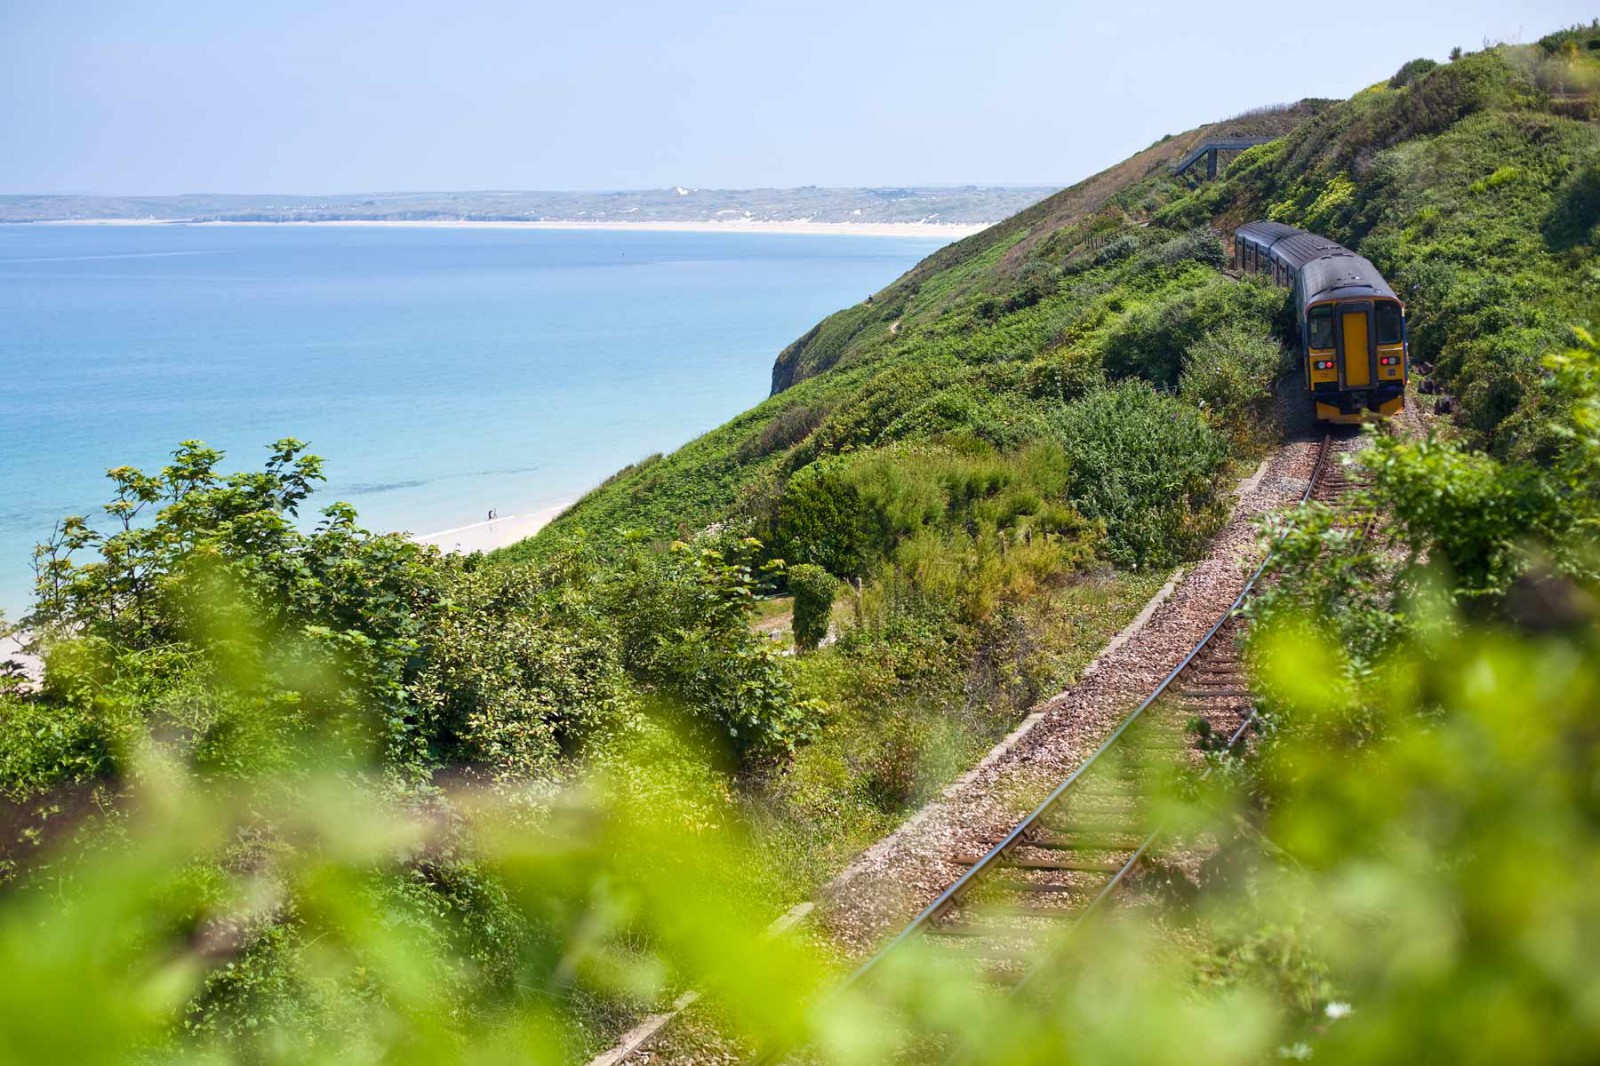 Train from Carbis Bay to St Ives